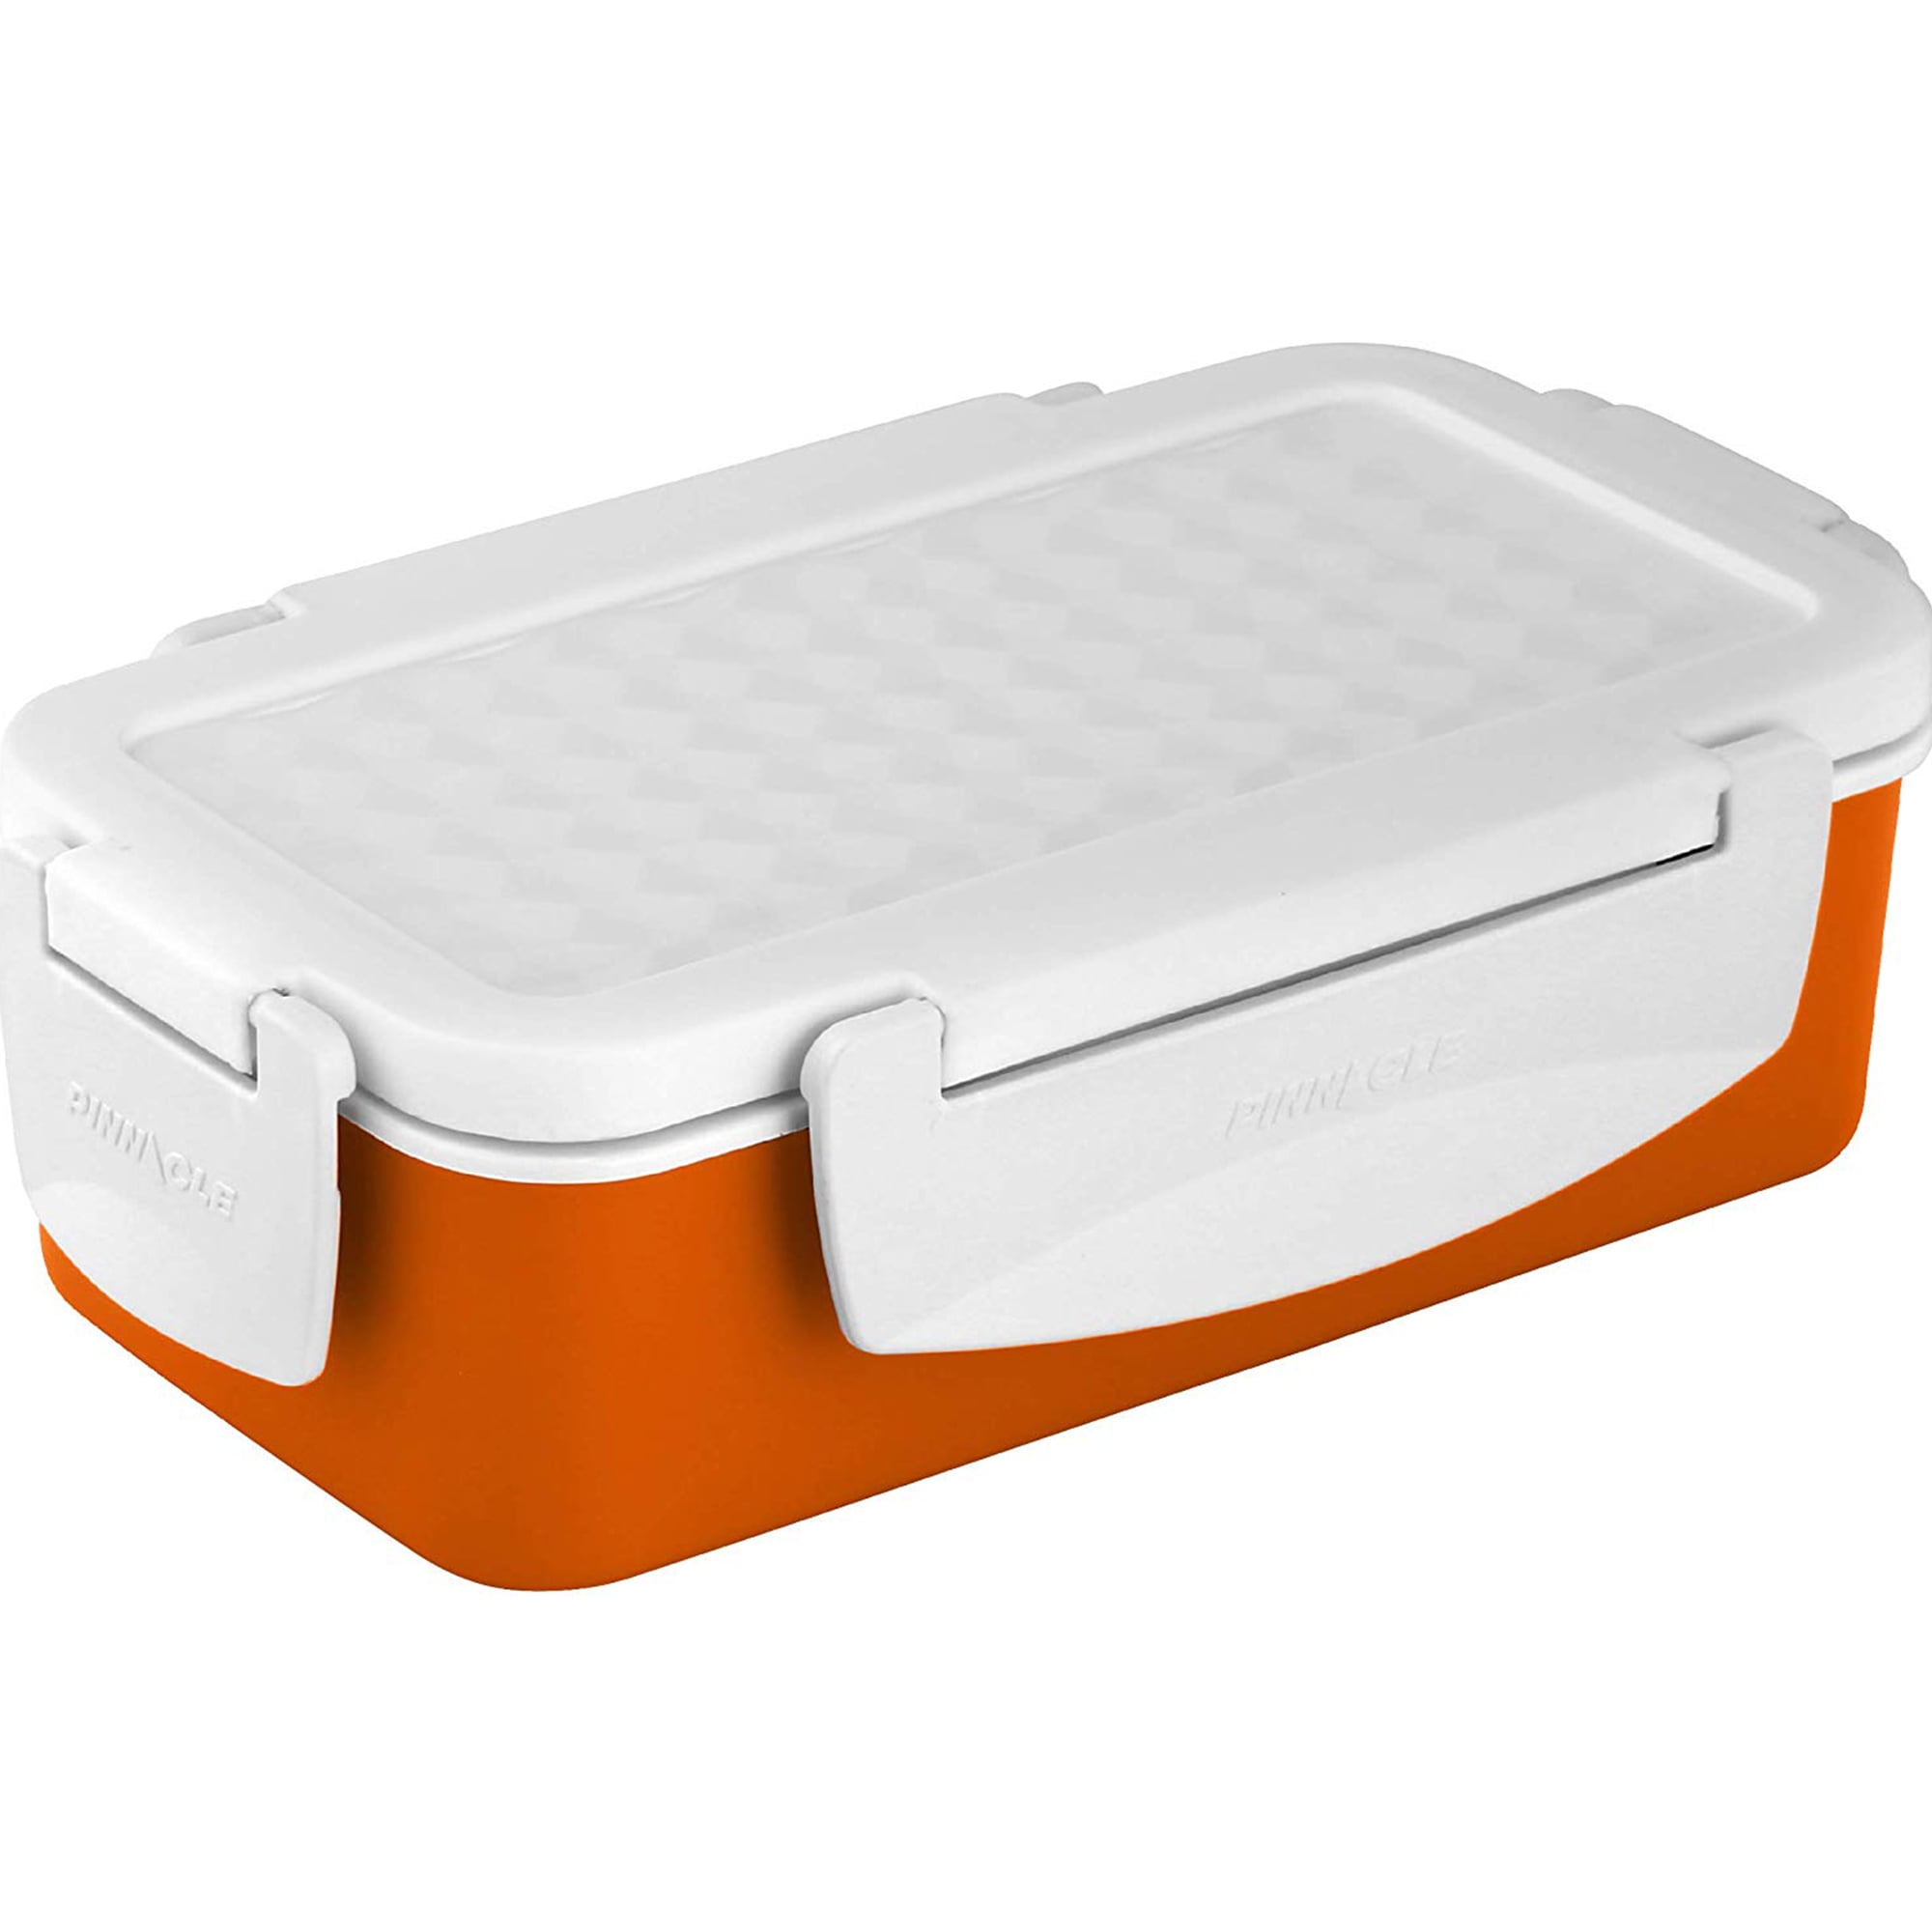 Pinnacle Insulated Lunch Box Stainless Steel Leak-Proof Adult Lunch Box  Large Thermal Lunch Boxes for Men and Women 24 oz. Big Lunch Container BPA  Free - Orange 